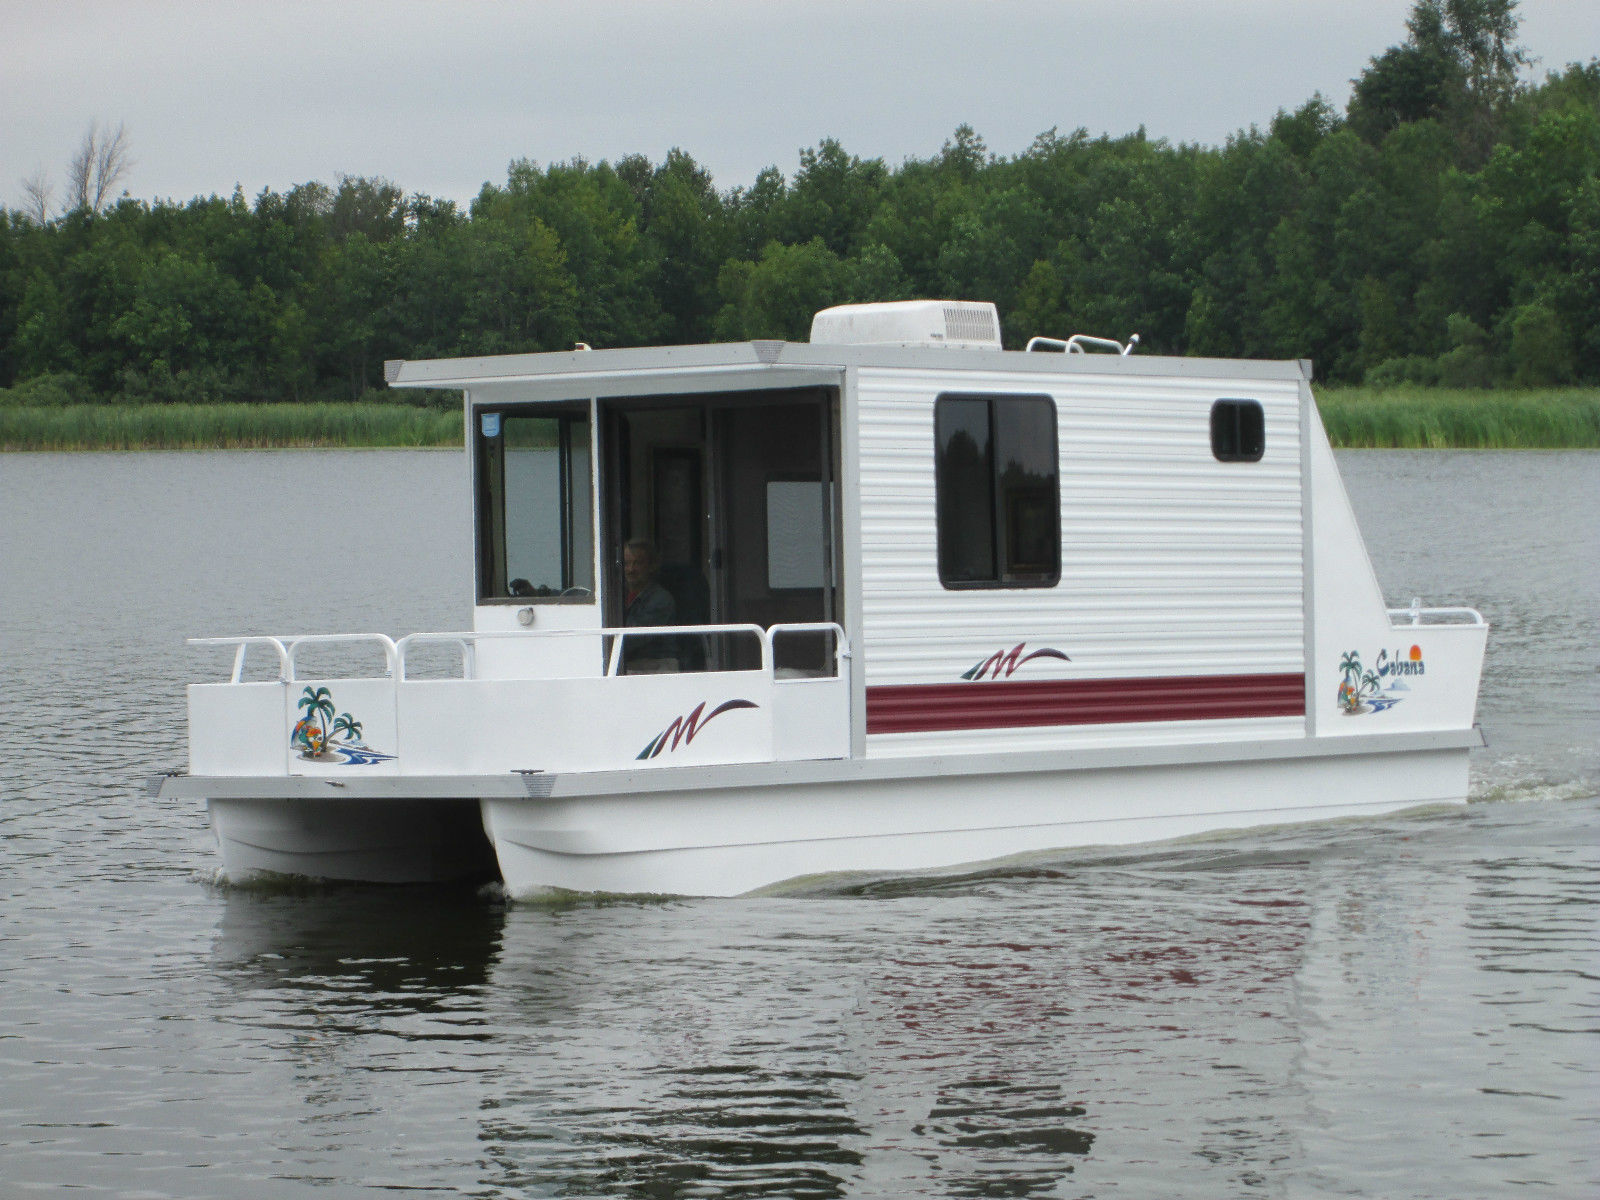 Houseboats For Sale Near Me - All You Need Infos